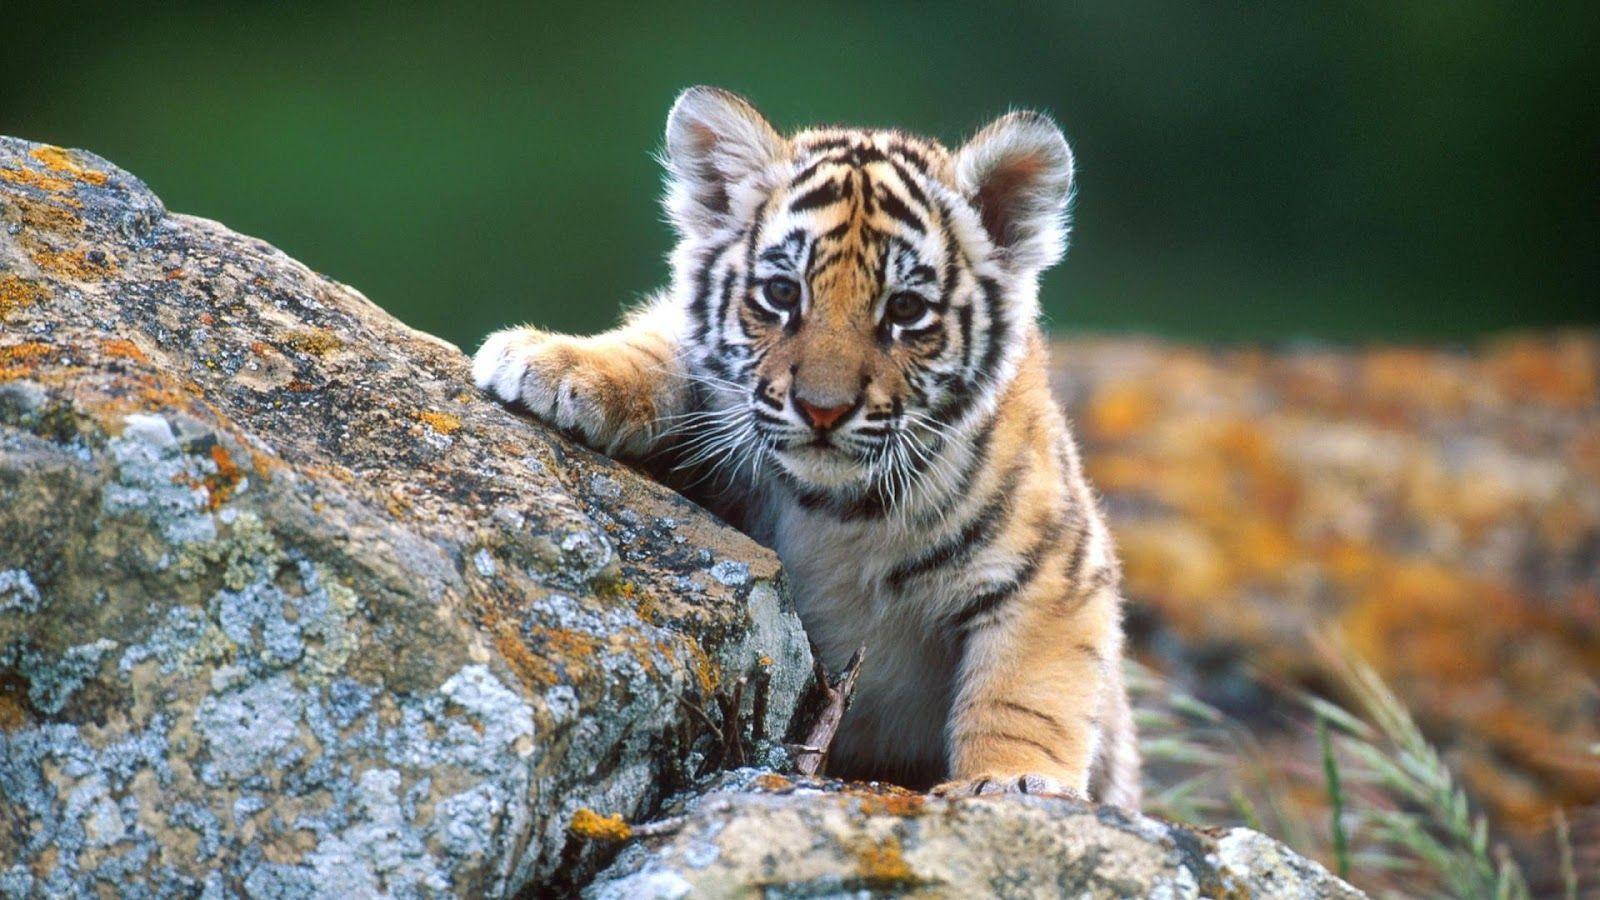 Cute Baby Animal Wallpapers - Wallpaper Cave